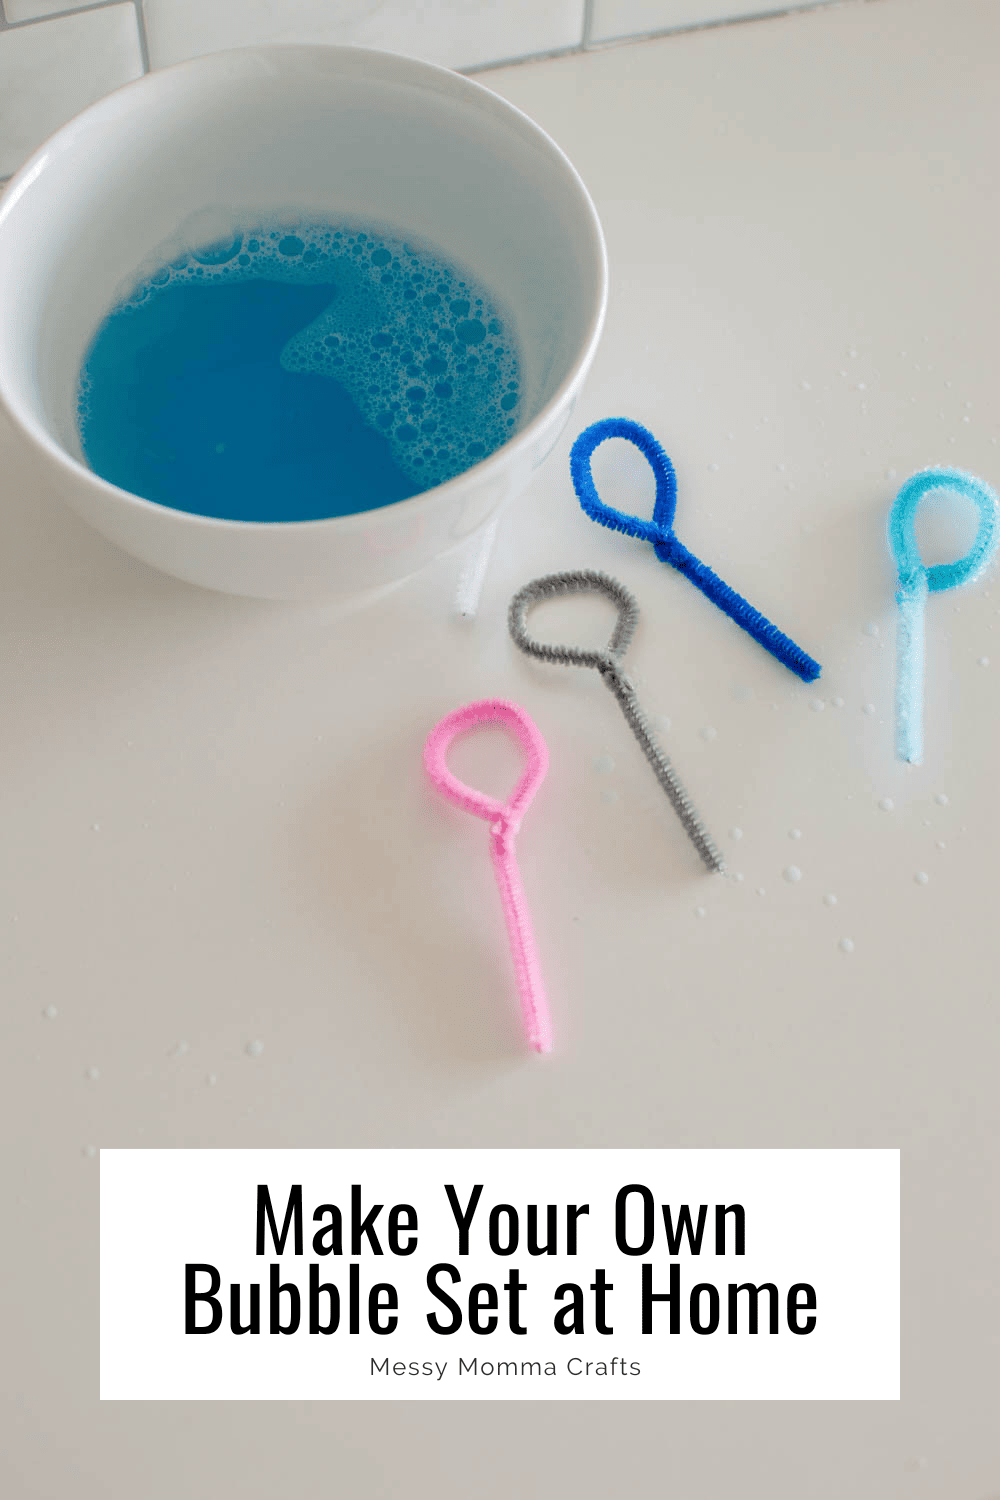 Homemade pipe cleaner bubble wands and a bowl of blue bubble solution.